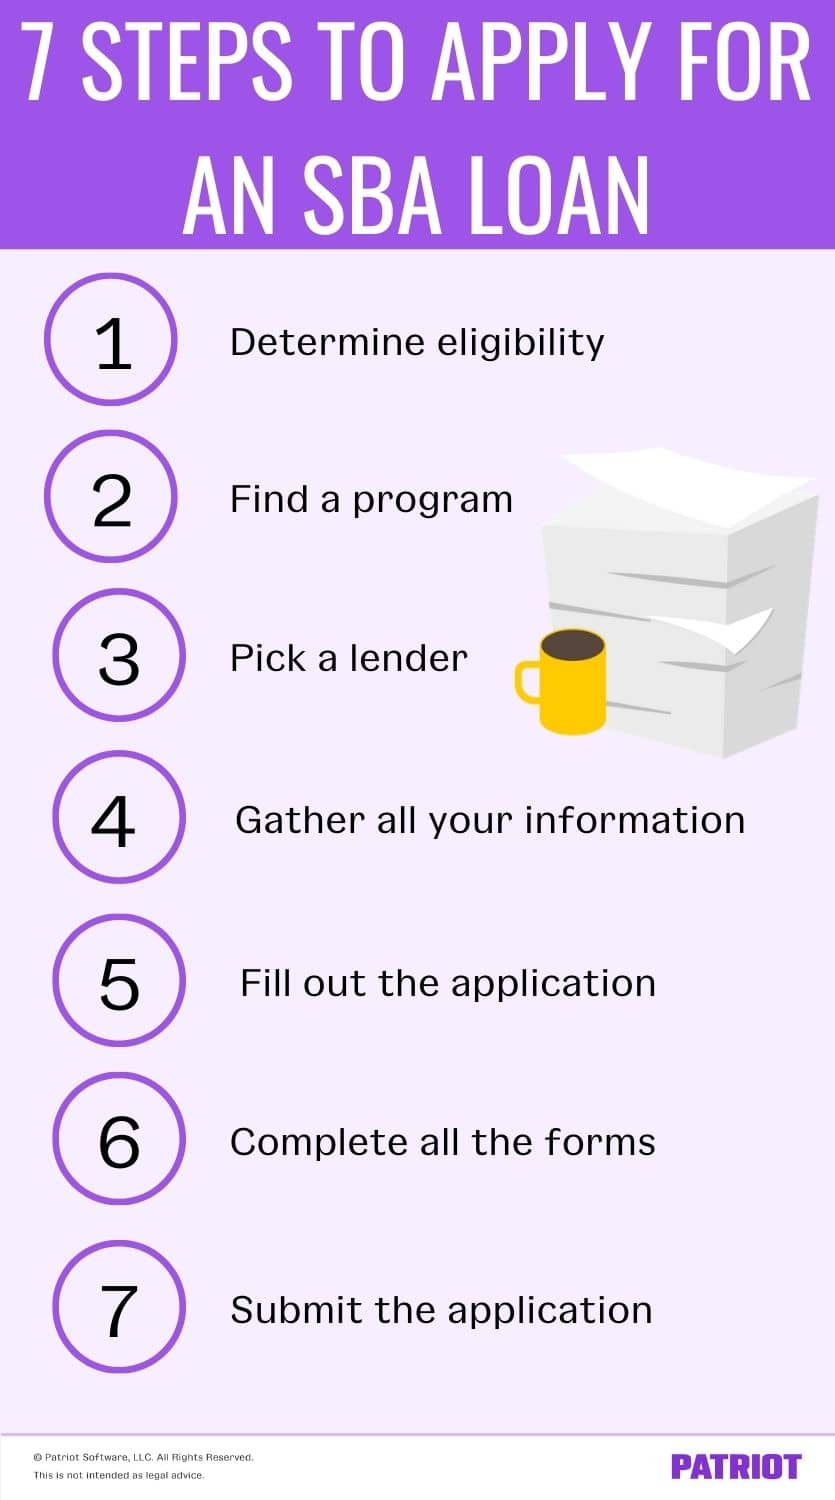 7 Steps to Apply for an SBA Loan. Determine eligibility, find a program, pick a lender, gather all your information, fill out the application, complete all the forms, and submit the application.